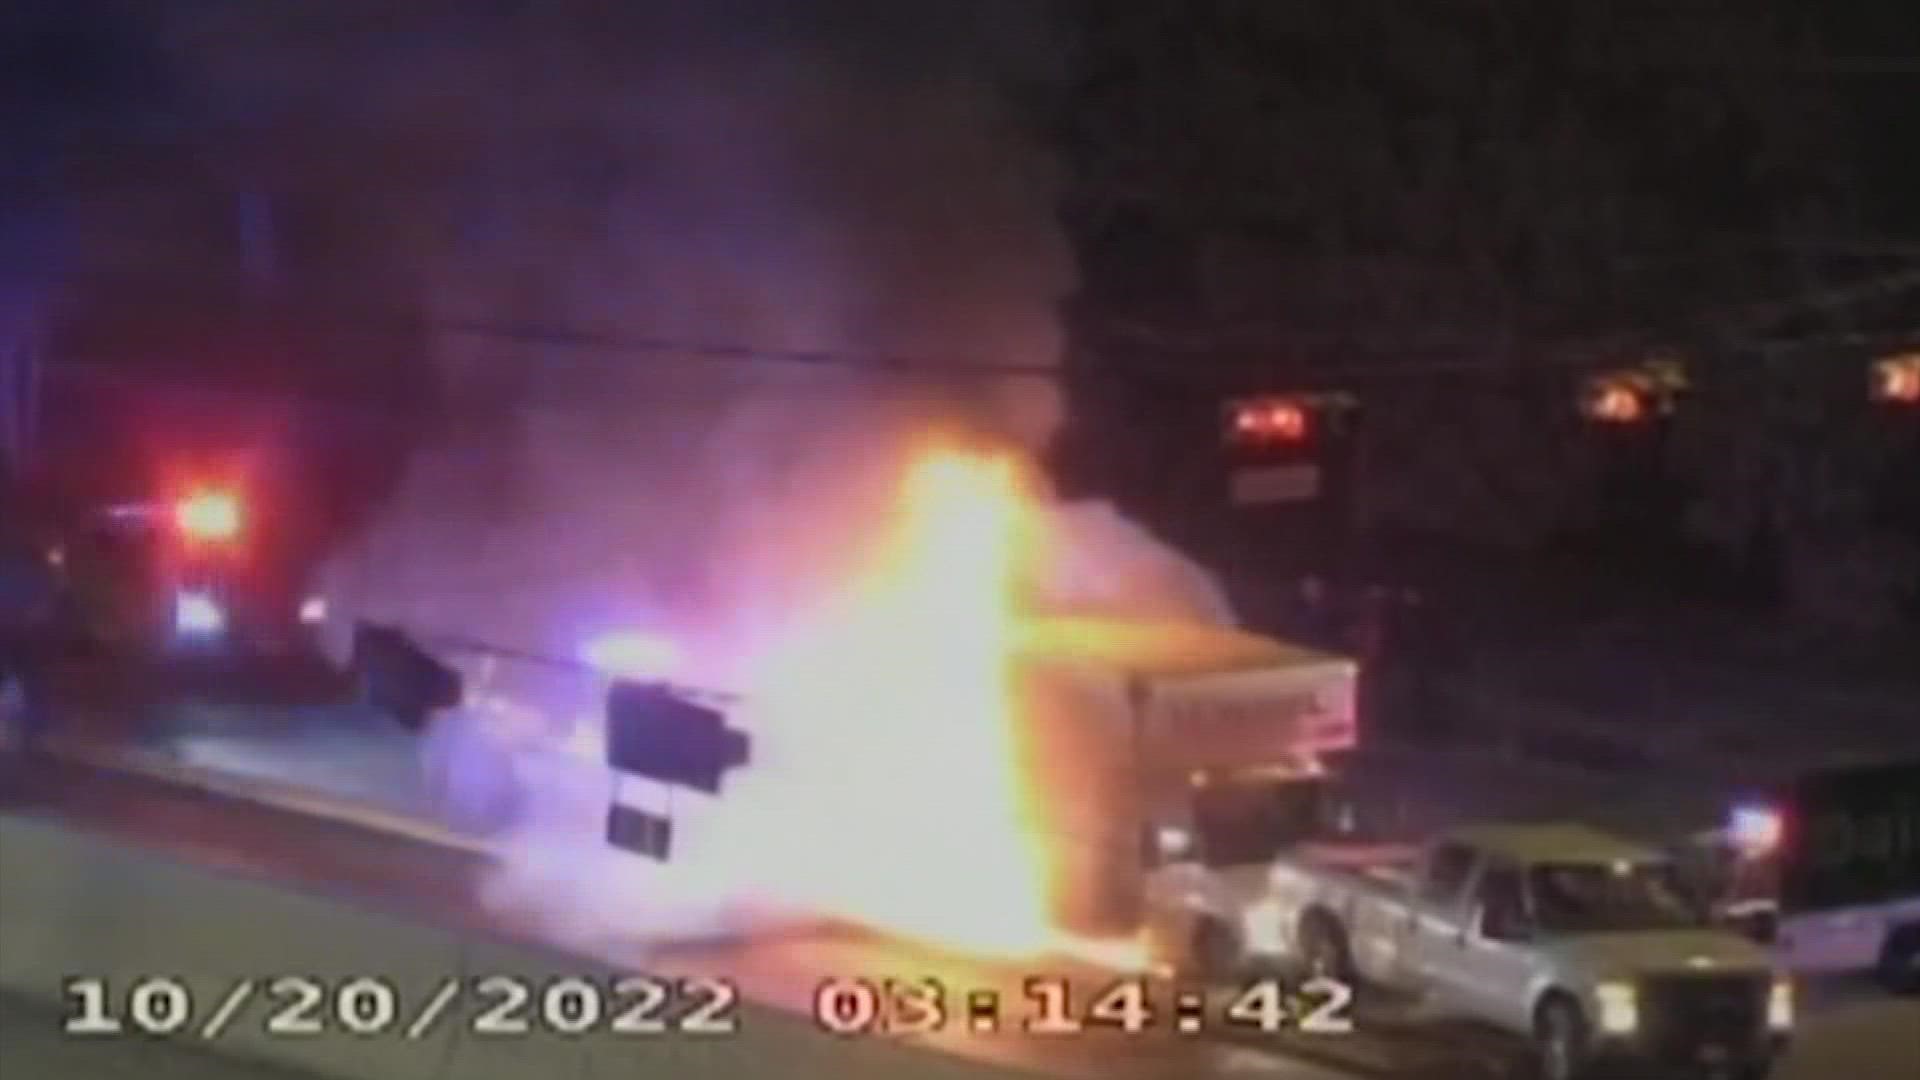 A stolen U-Haul went up in flames after a driver led police on a miles-long chase in west Houston.